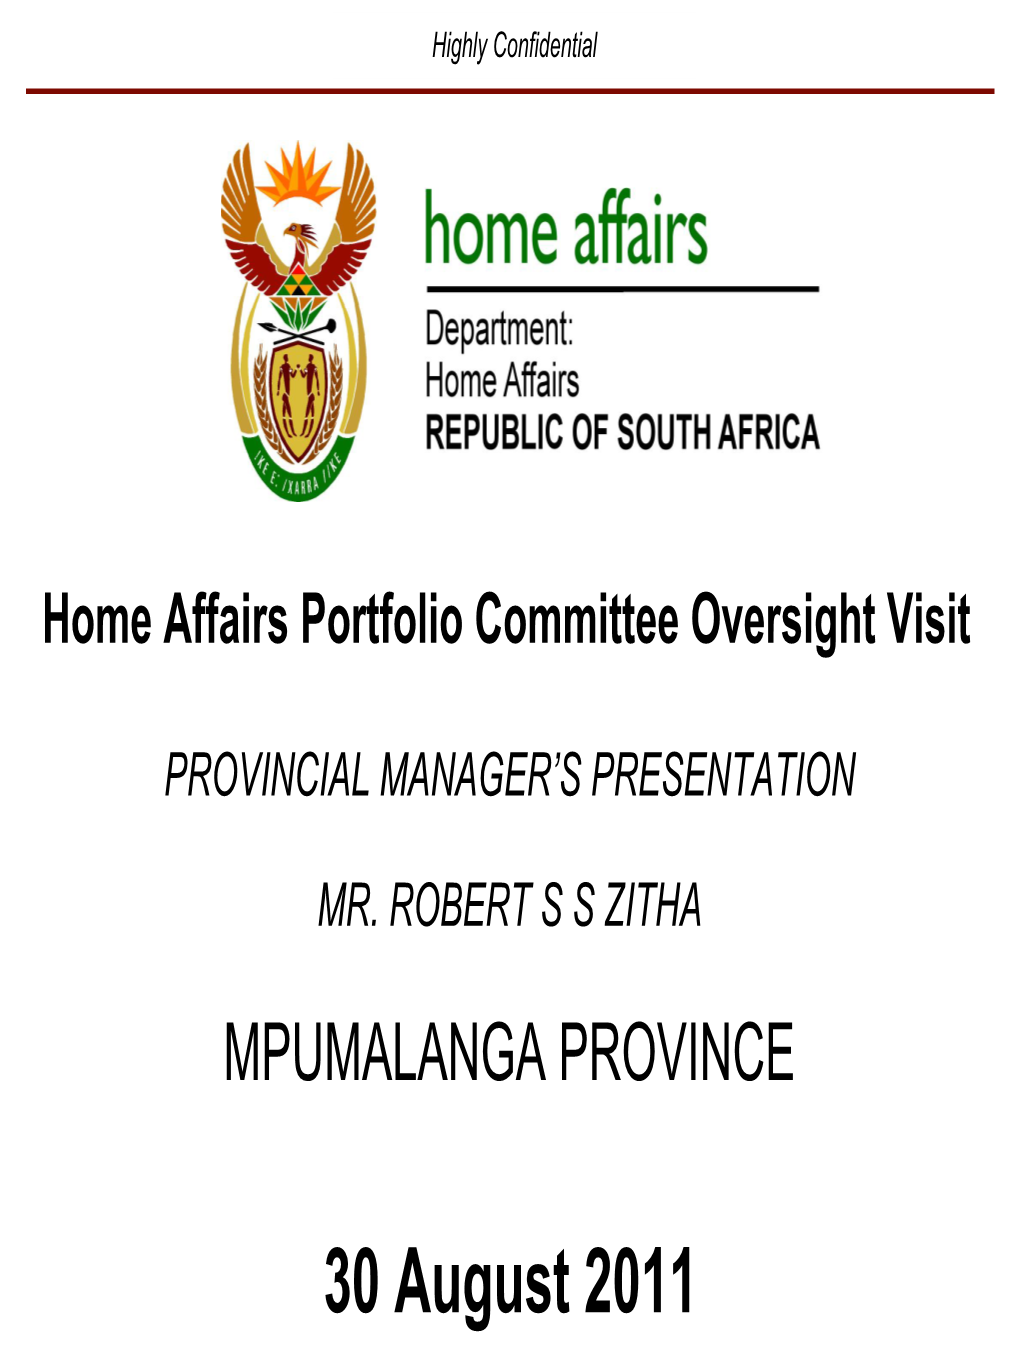 Highly Confidential MPUMALANGA PROVINCE